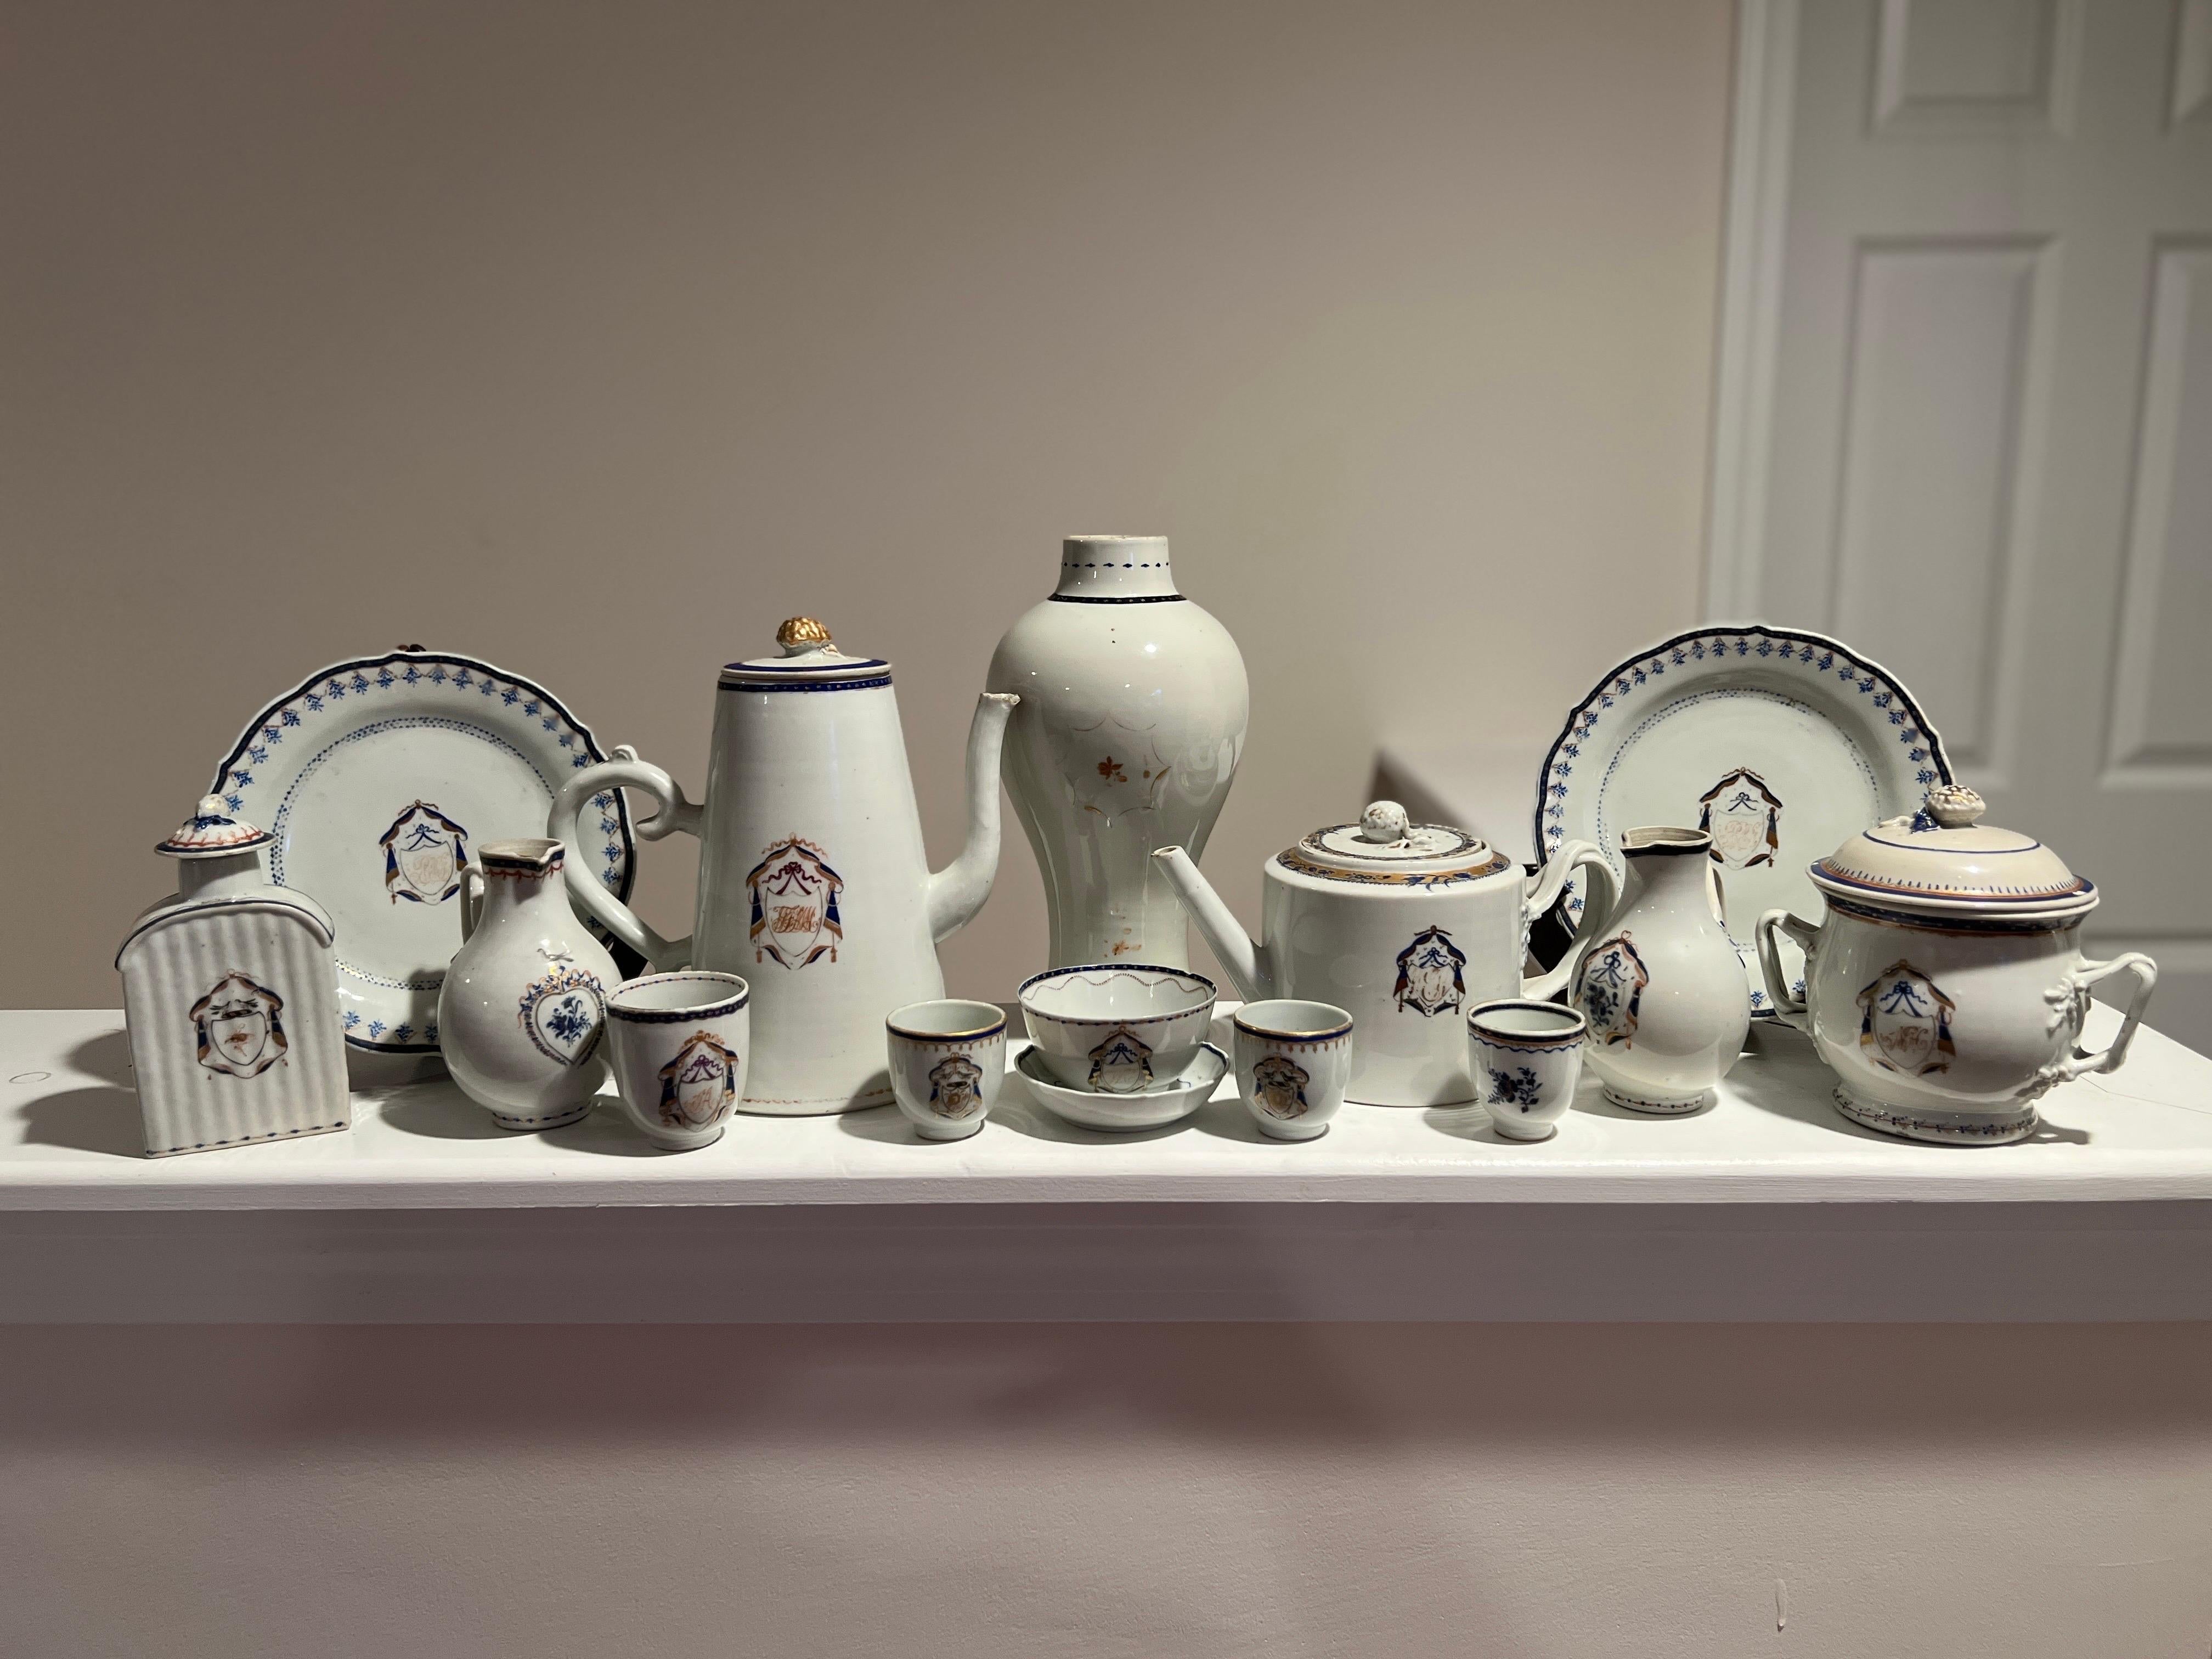 Chinese, late 18th to early 19th century for the English and American markets. 

An instant collection for any admirer of Chinese export porcelain!!!! This grouping would fill a shelf for display in any home.

This stunning collection encompasses a